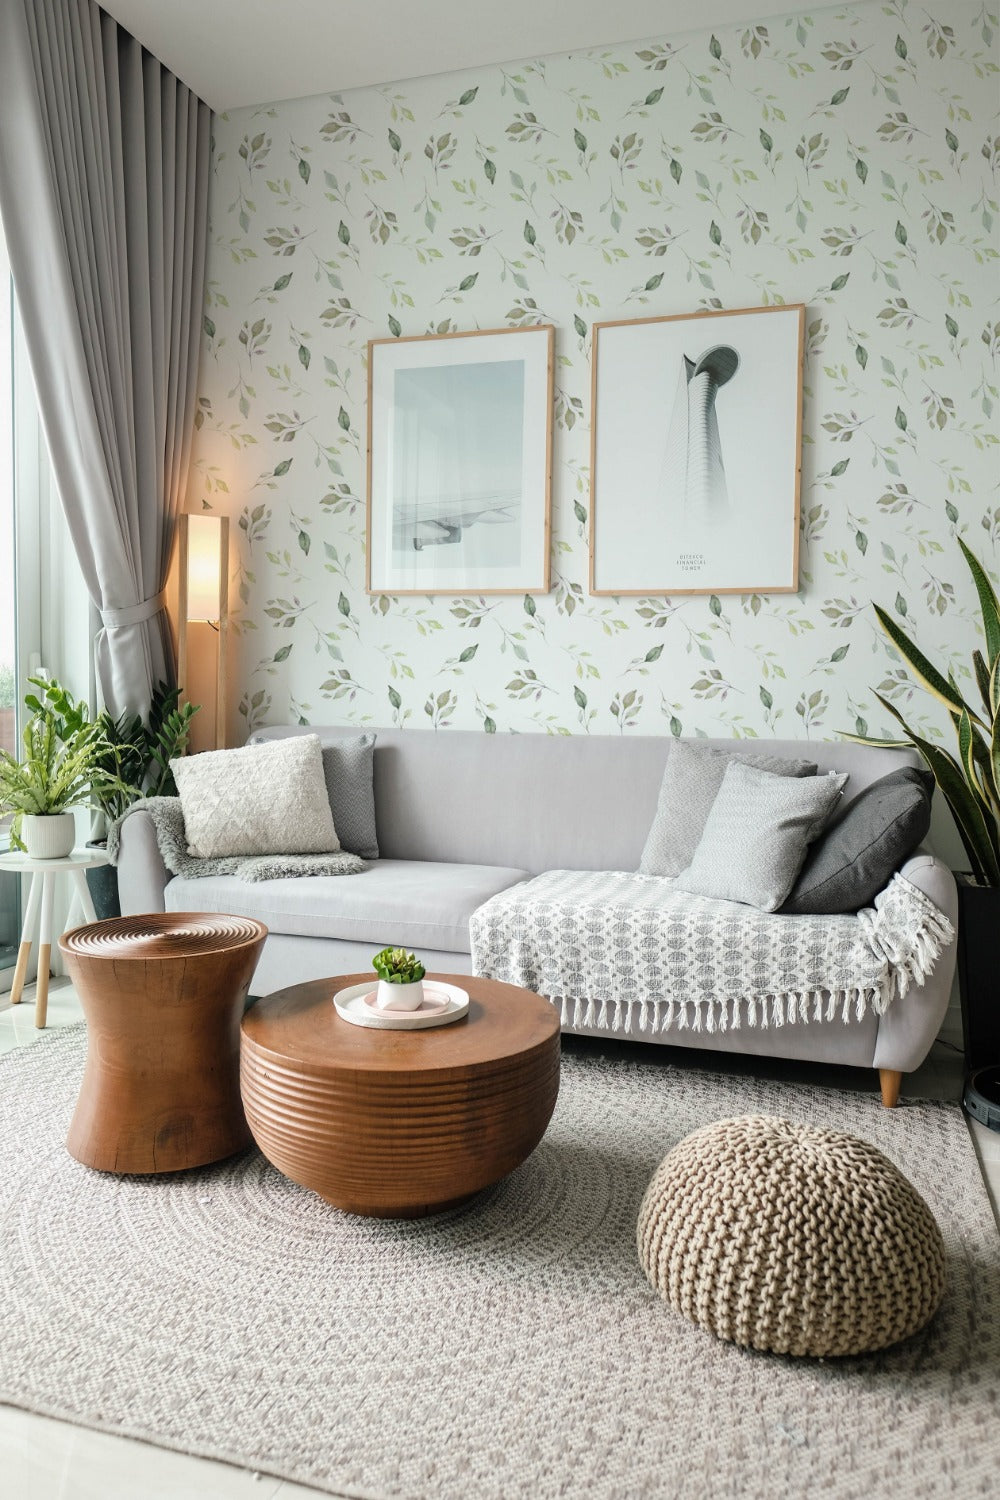 A cozy living room corner with a gray sectional sofa adorned with throw pillows and a tasseled blanket. The wall behind is clad in wallpaper featuring a gentle pattern of watercolor leaves in shades of green on a white background. Two framed abstract art pieces hang on the wall, complementing the serene ambiance.